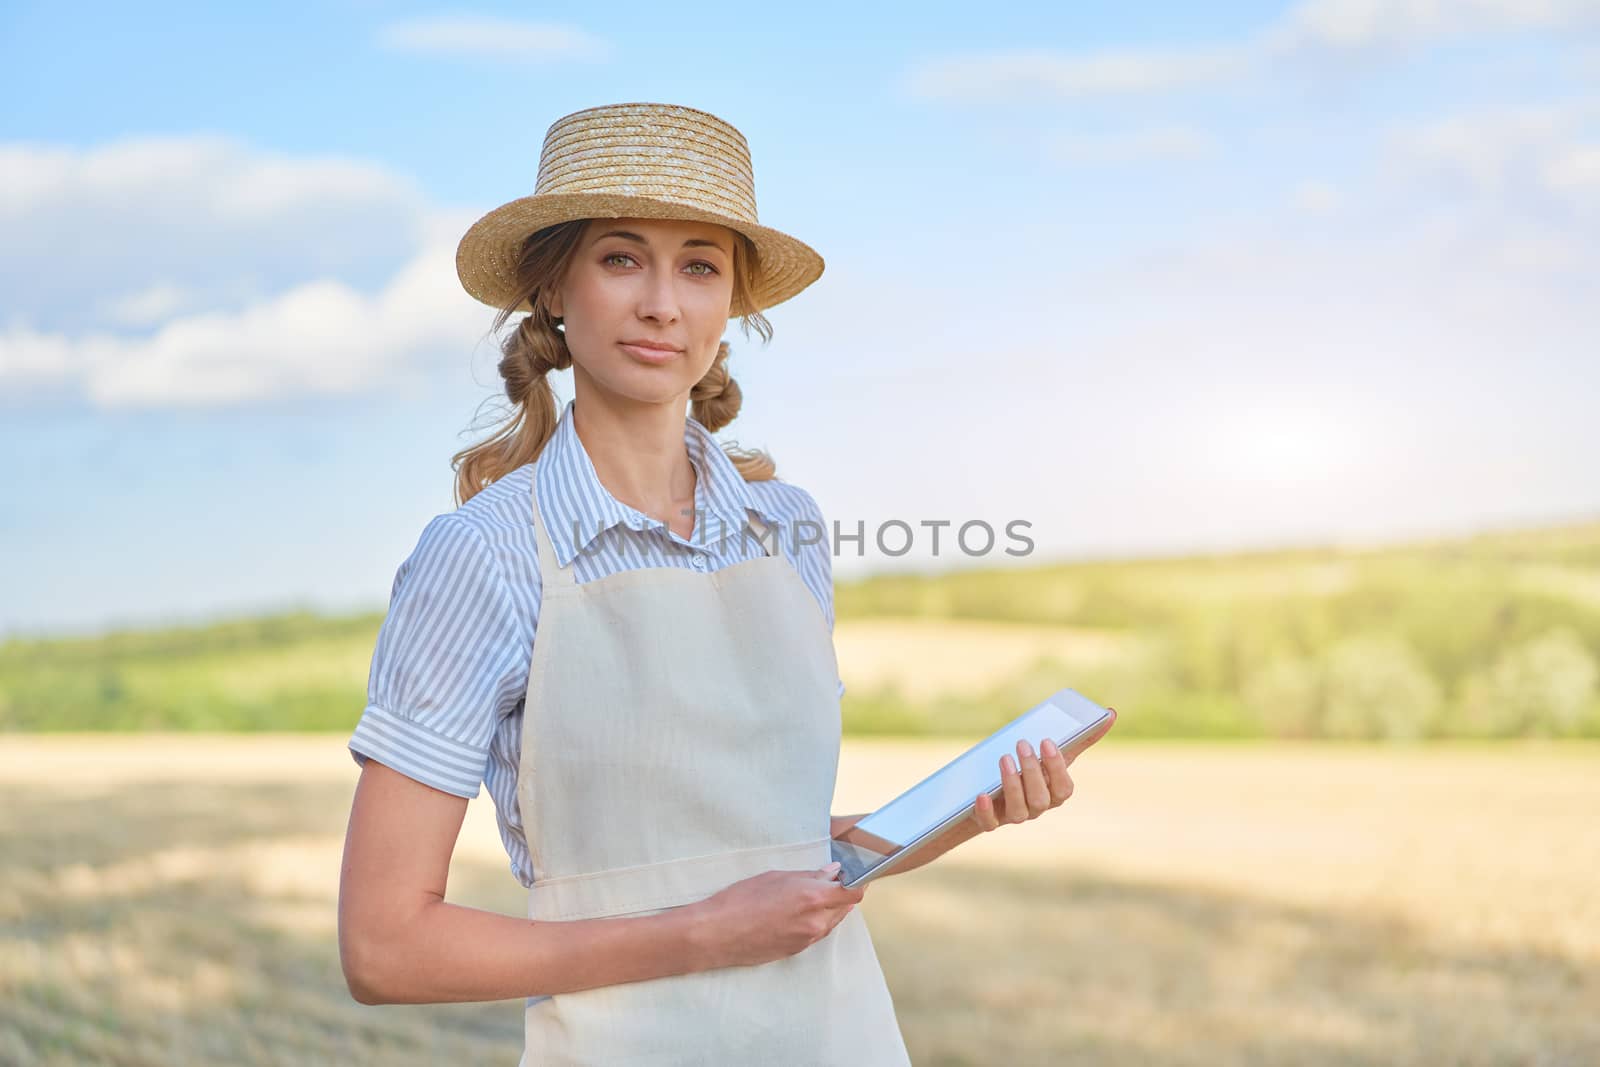 Woman farmer straw hat smart farming standing farmland smiling using digital tablet Female agronomist specialist research monitoring analysis data agribusiness by andreonegin